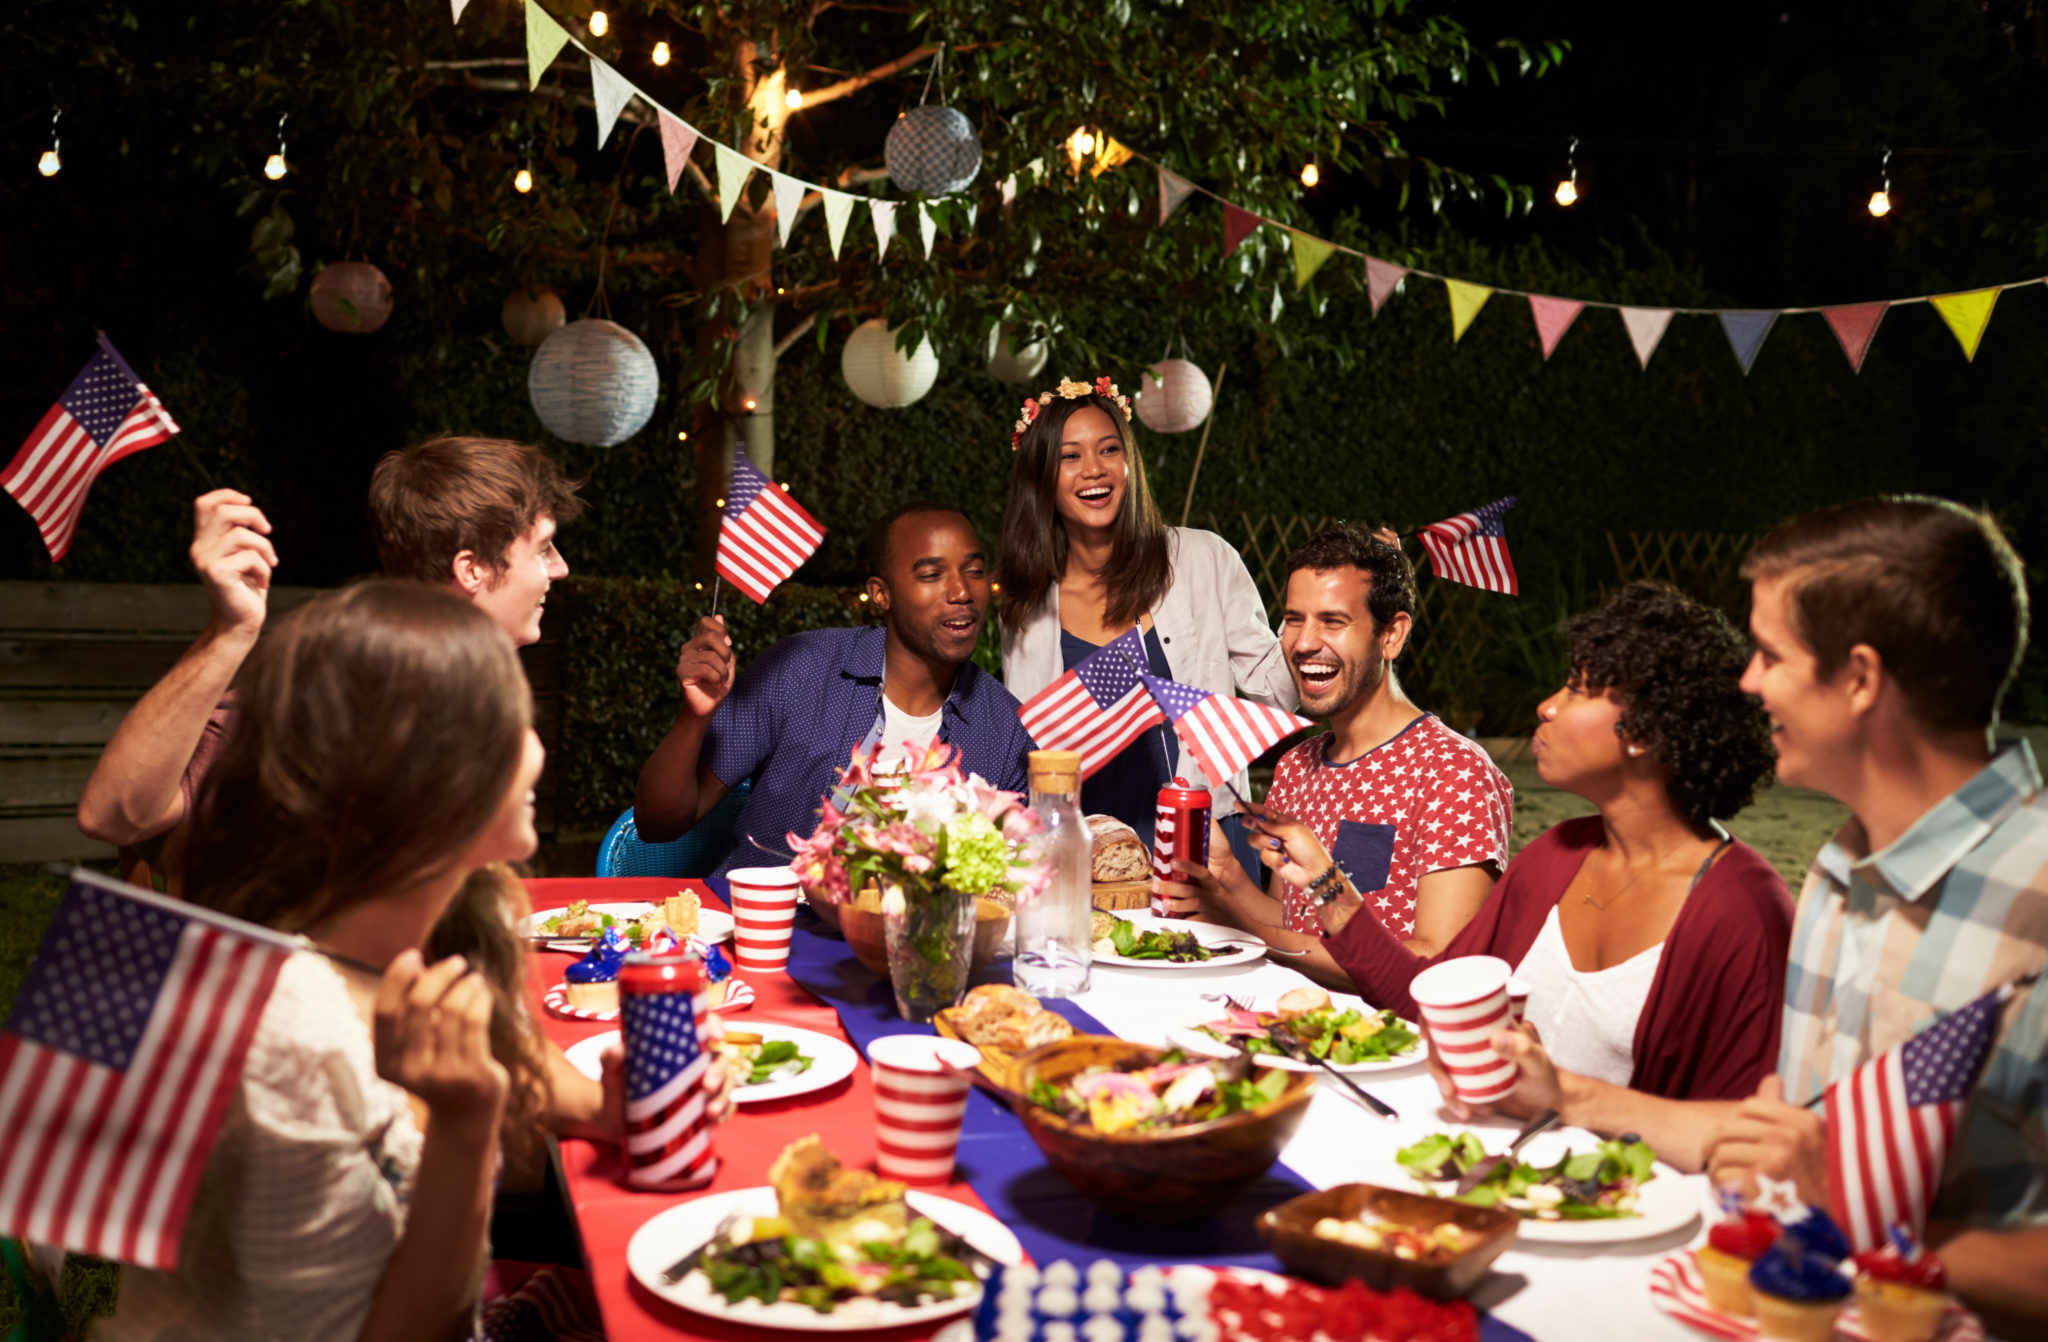 The Most Common 4th of July Accidents The Green Law Firm